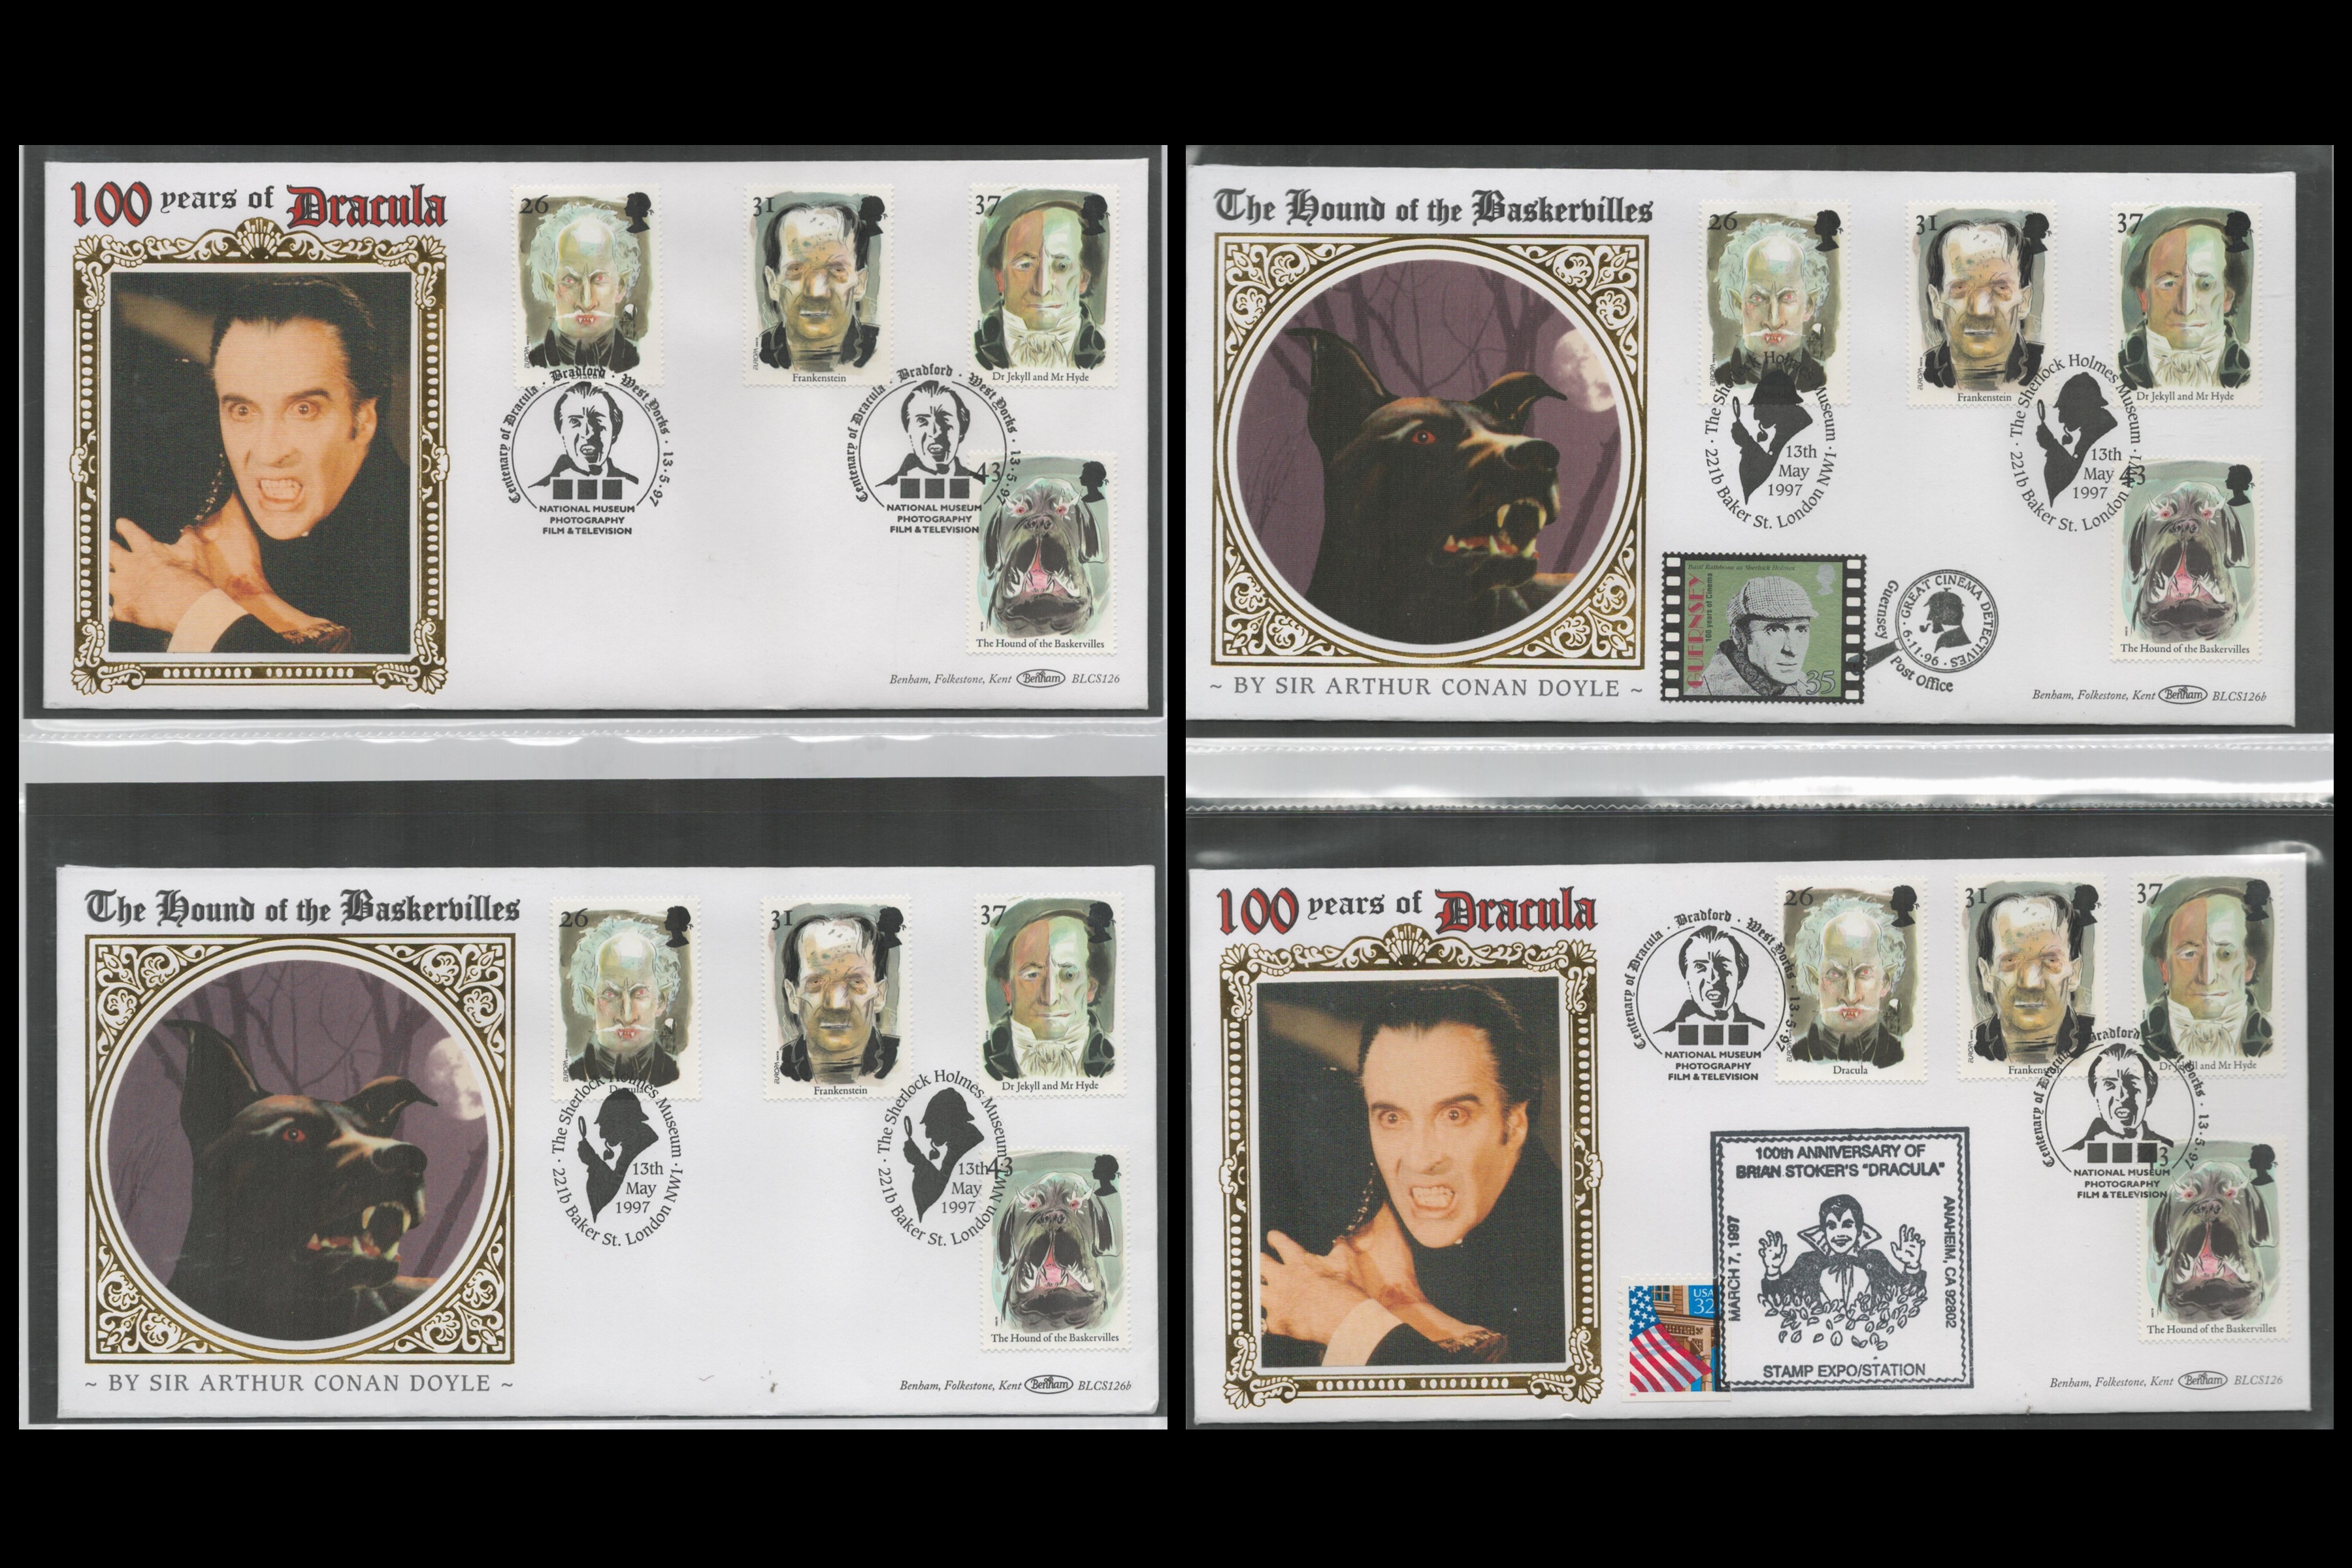 Collection. Collection of 4 Horror Benhams Silk Cachet FDCs. None are Signed. All Contain Stamps and - Image 2 of 2